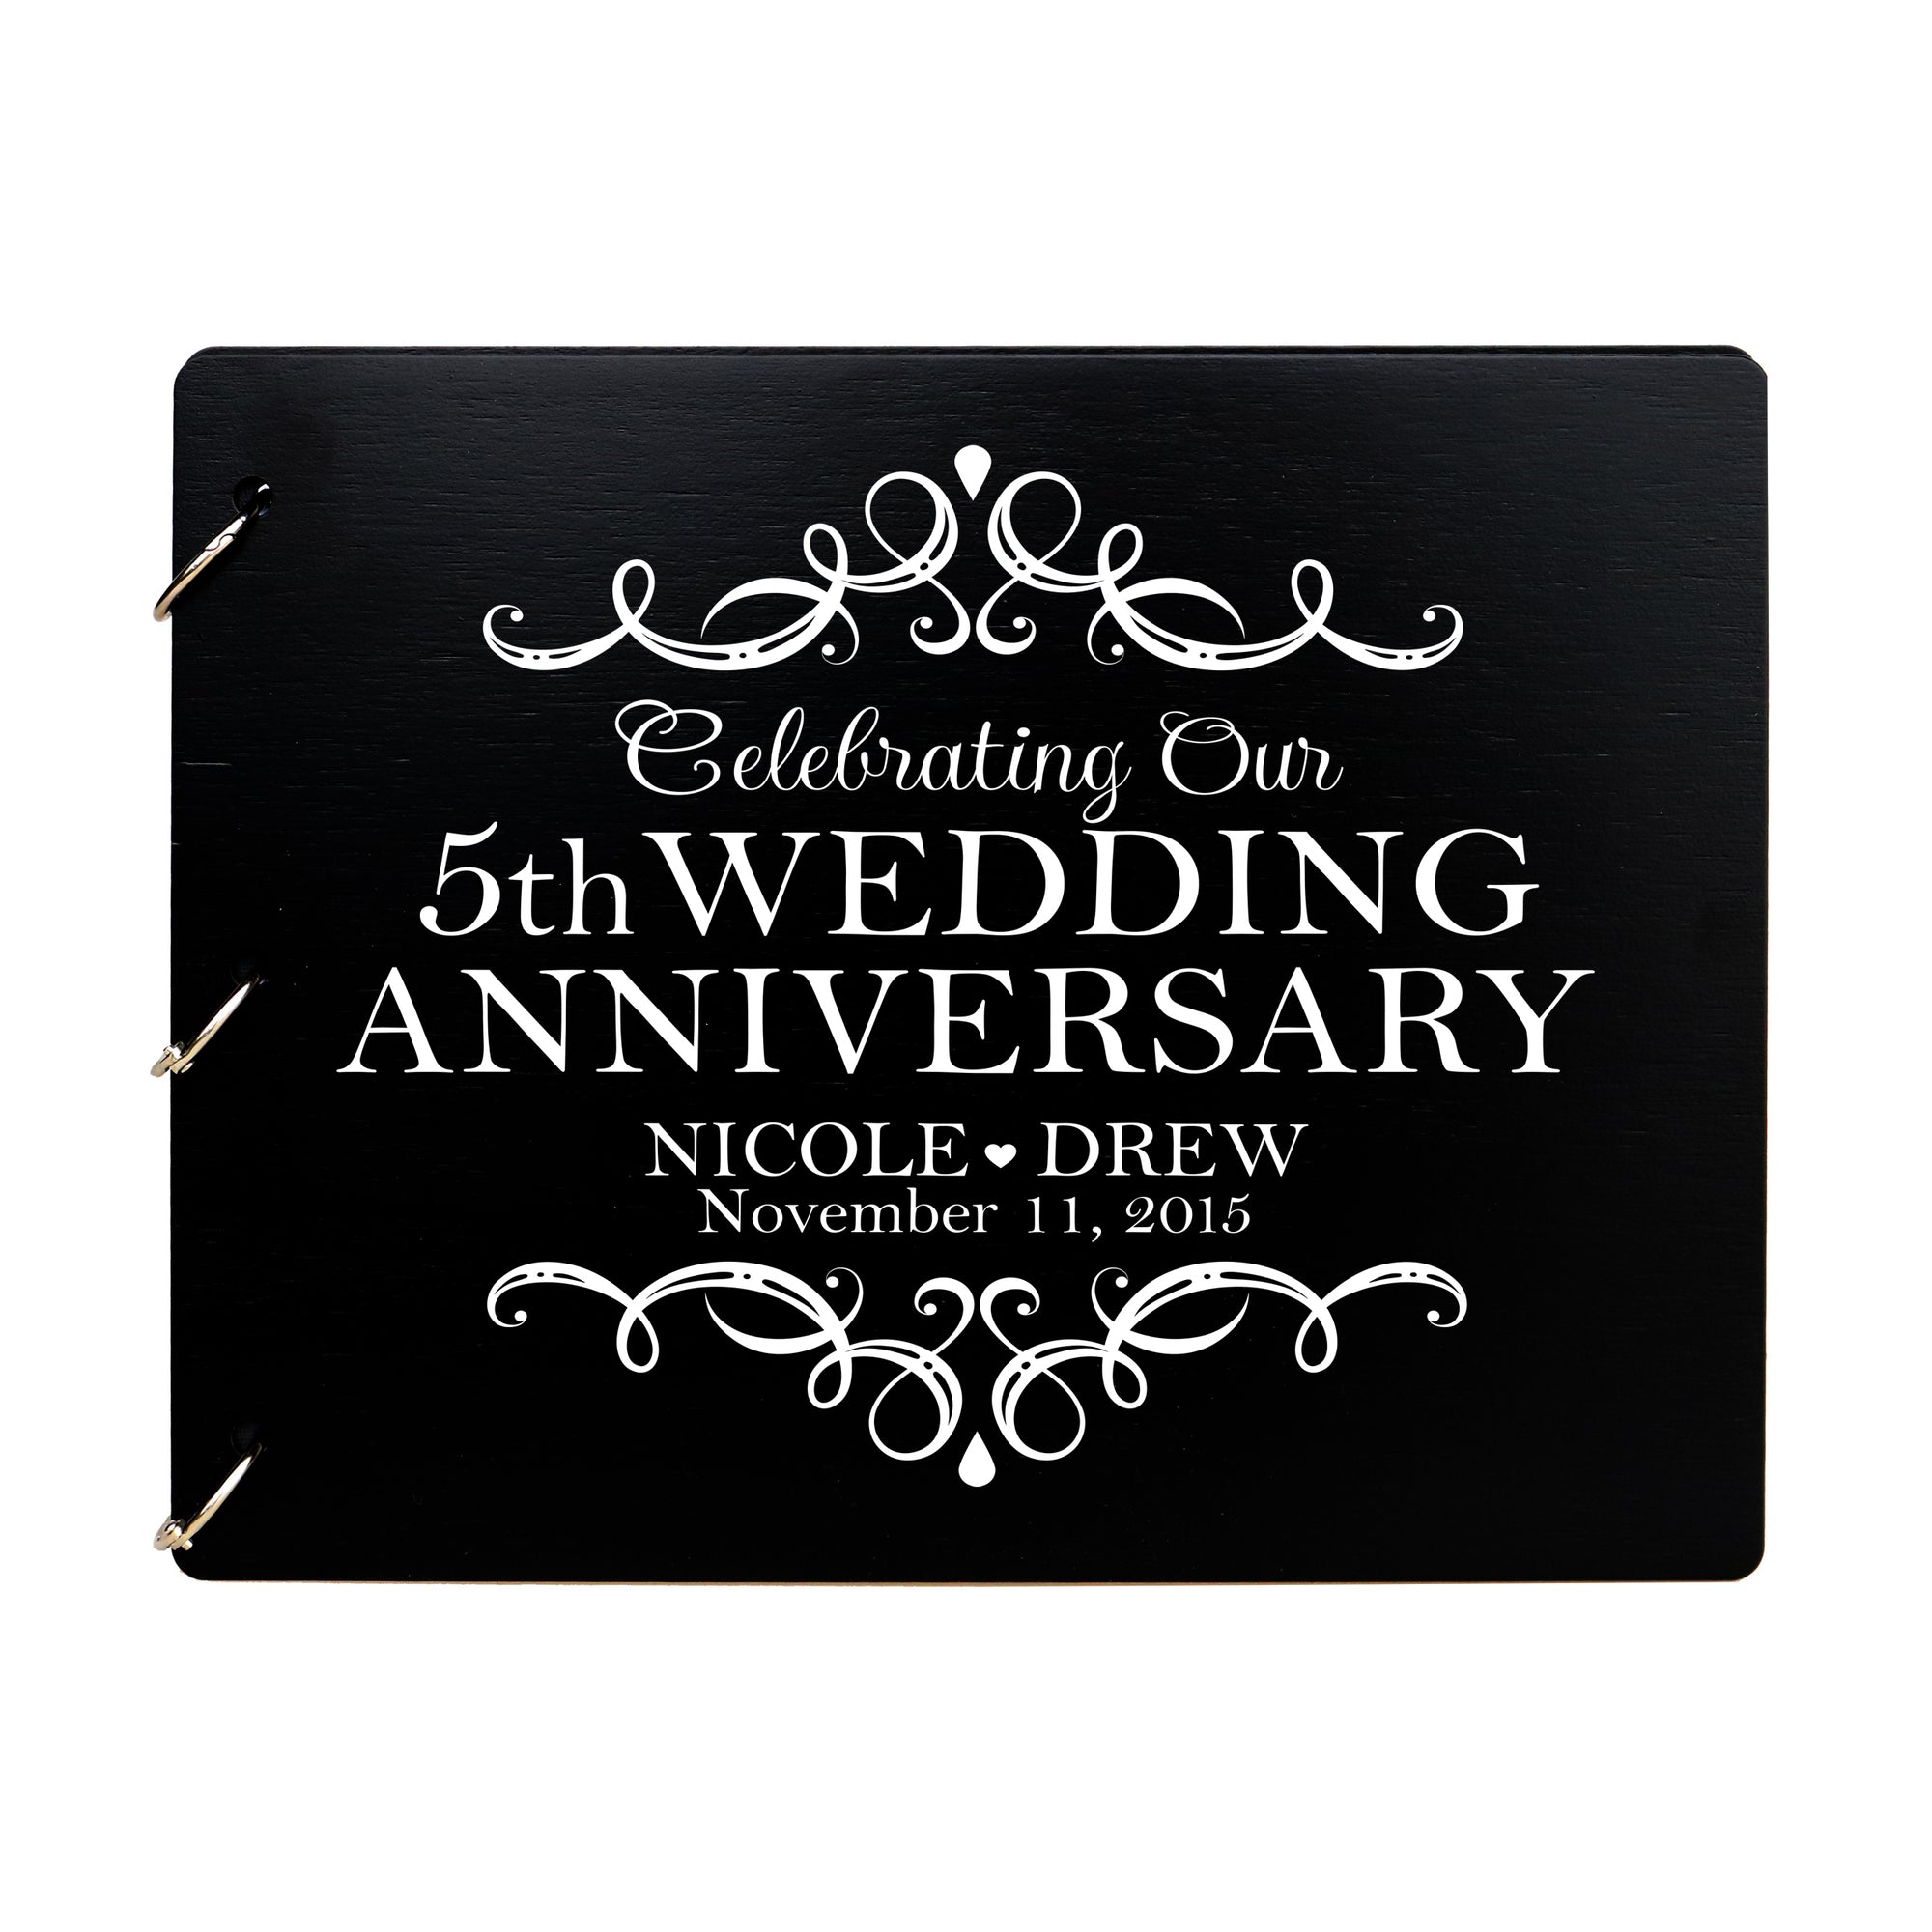 LifeSong Milestones Personalized Guestbook Sign for 5th Wedding Anniversary Gift Ideas